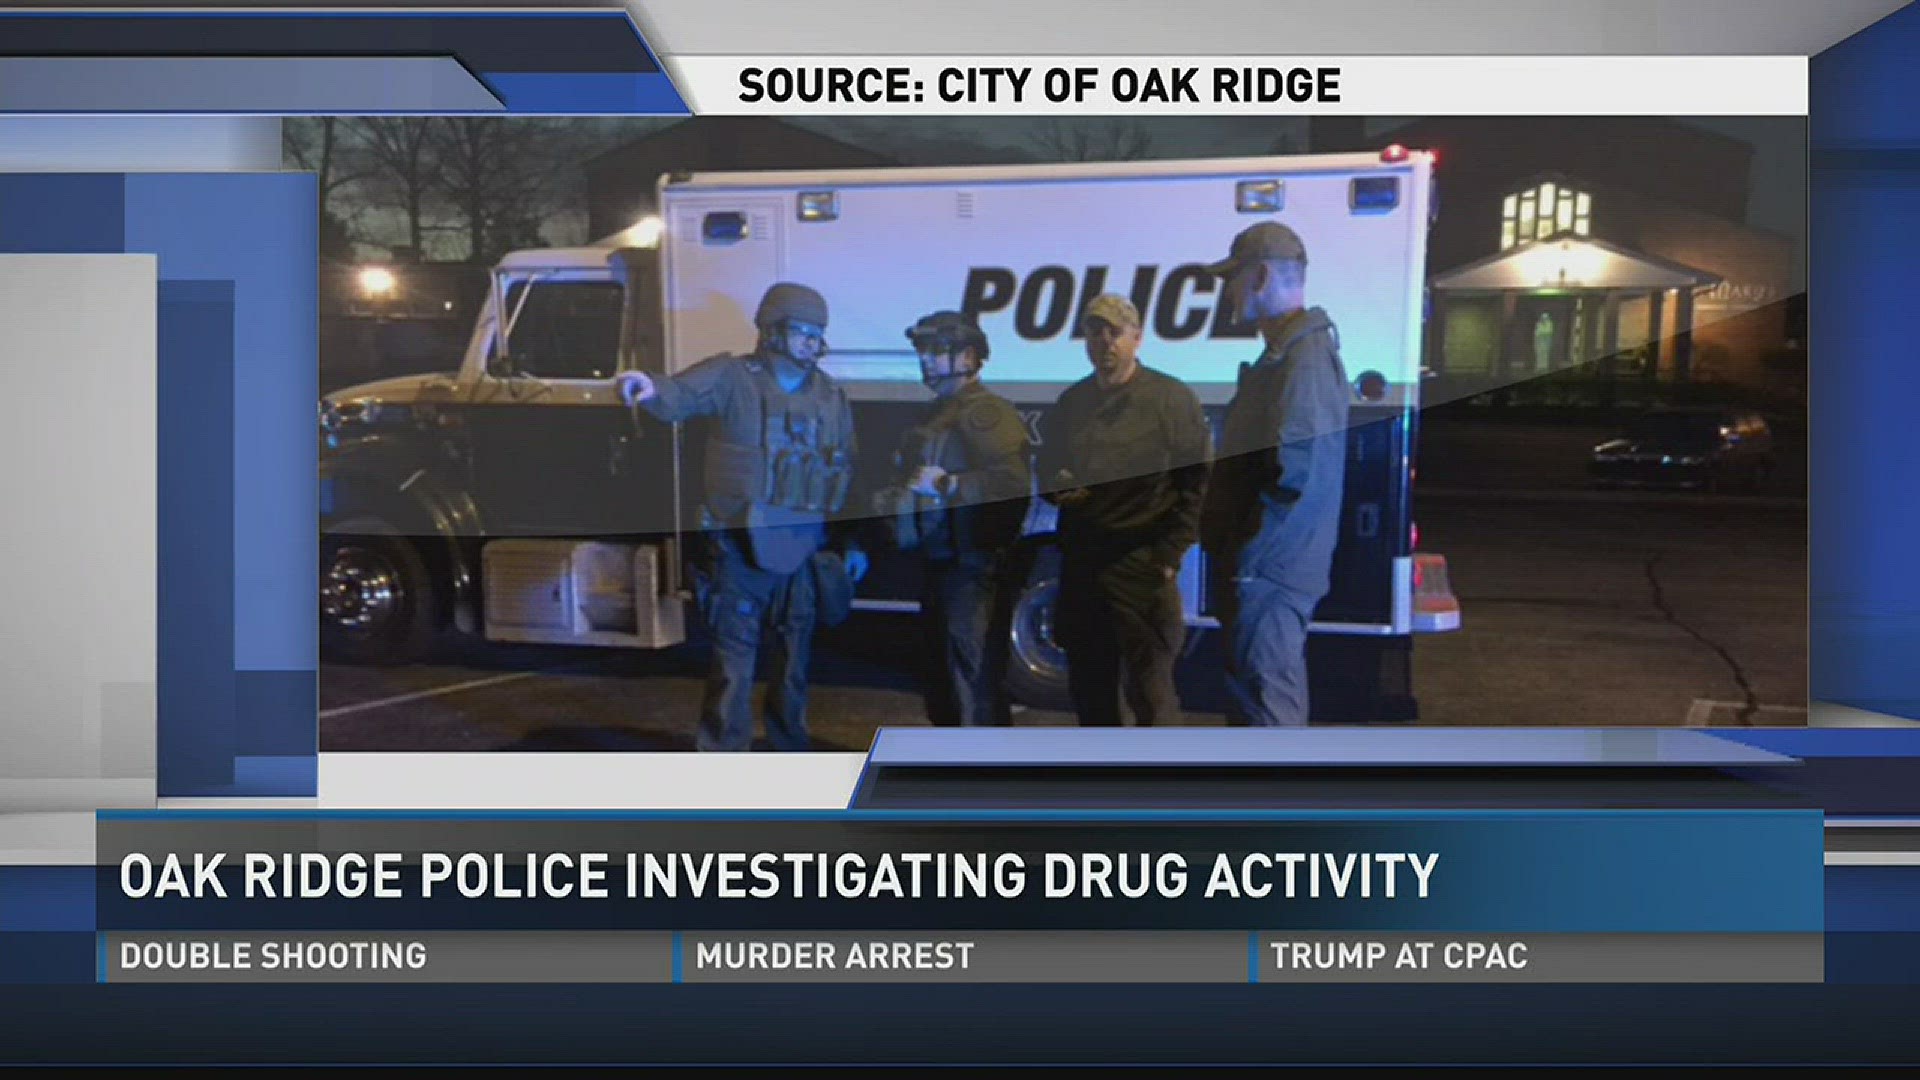 Charges are pending after the Oak Ridge Police Department SWAT team served a search warrant on Friday morning.